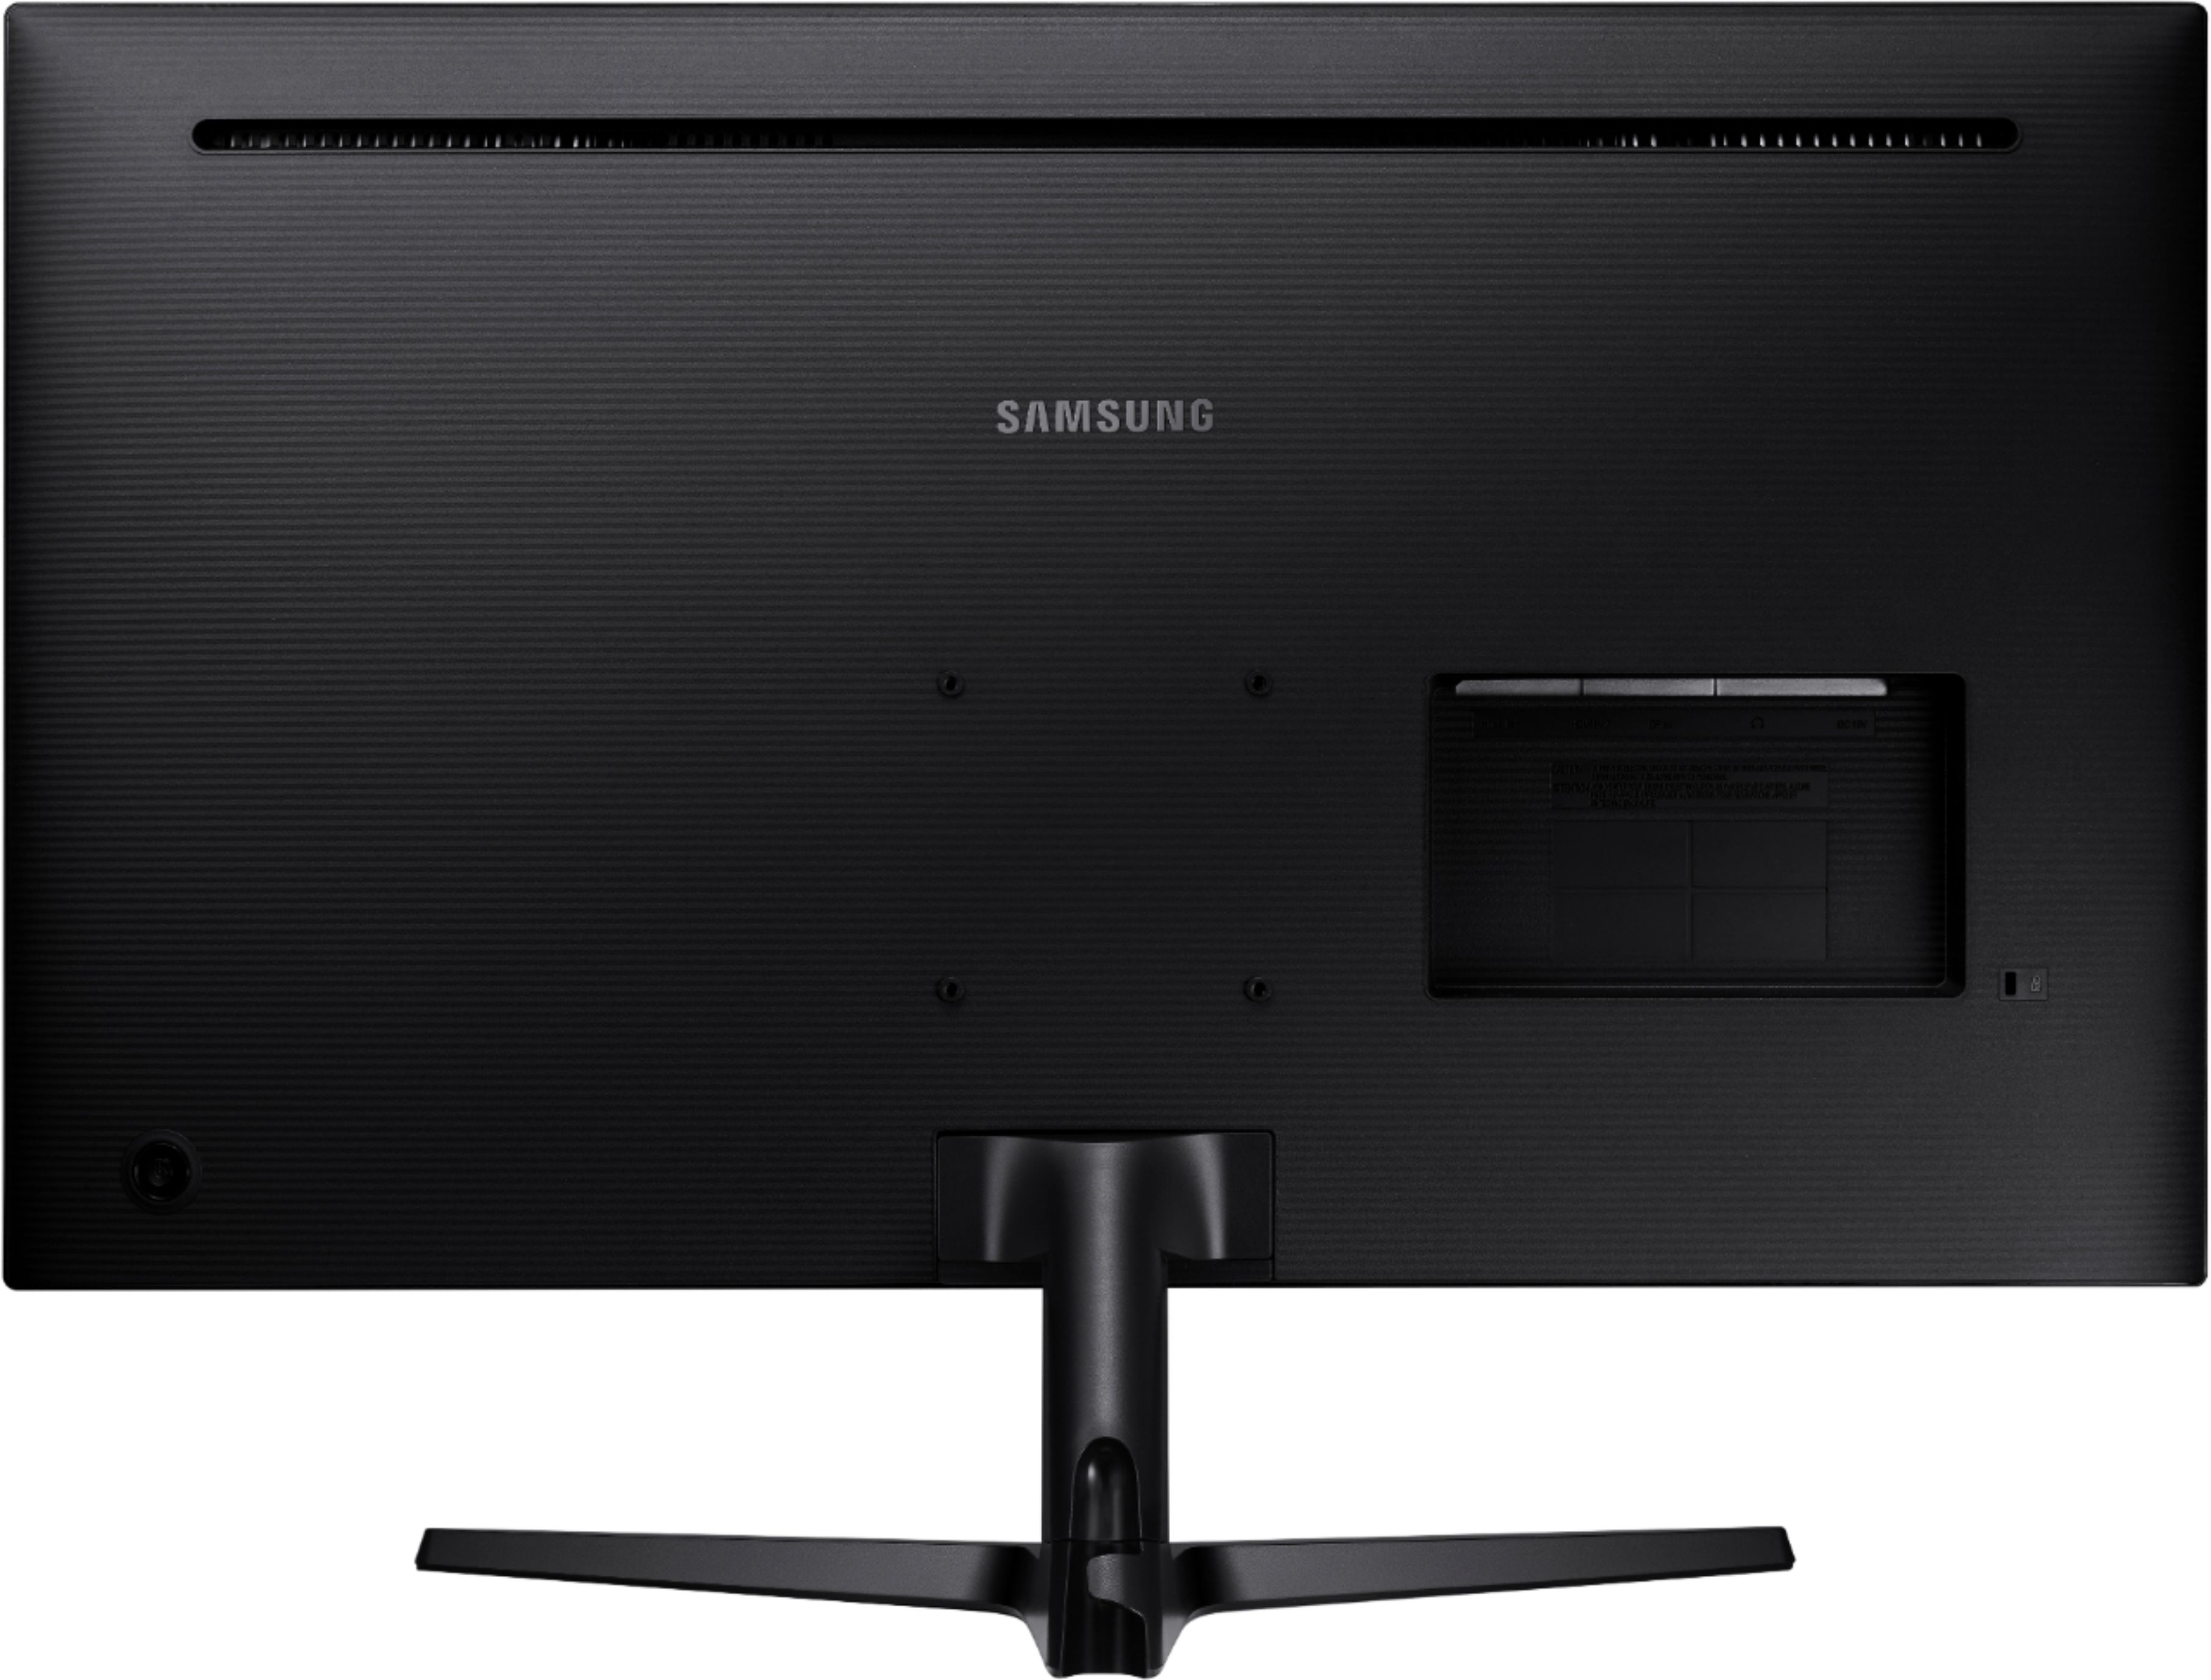 Back View: Samsung - Geek Squad Certified Refurbished A800 Series 27" IPS LED 4K UHD Monitor with HDR - Black